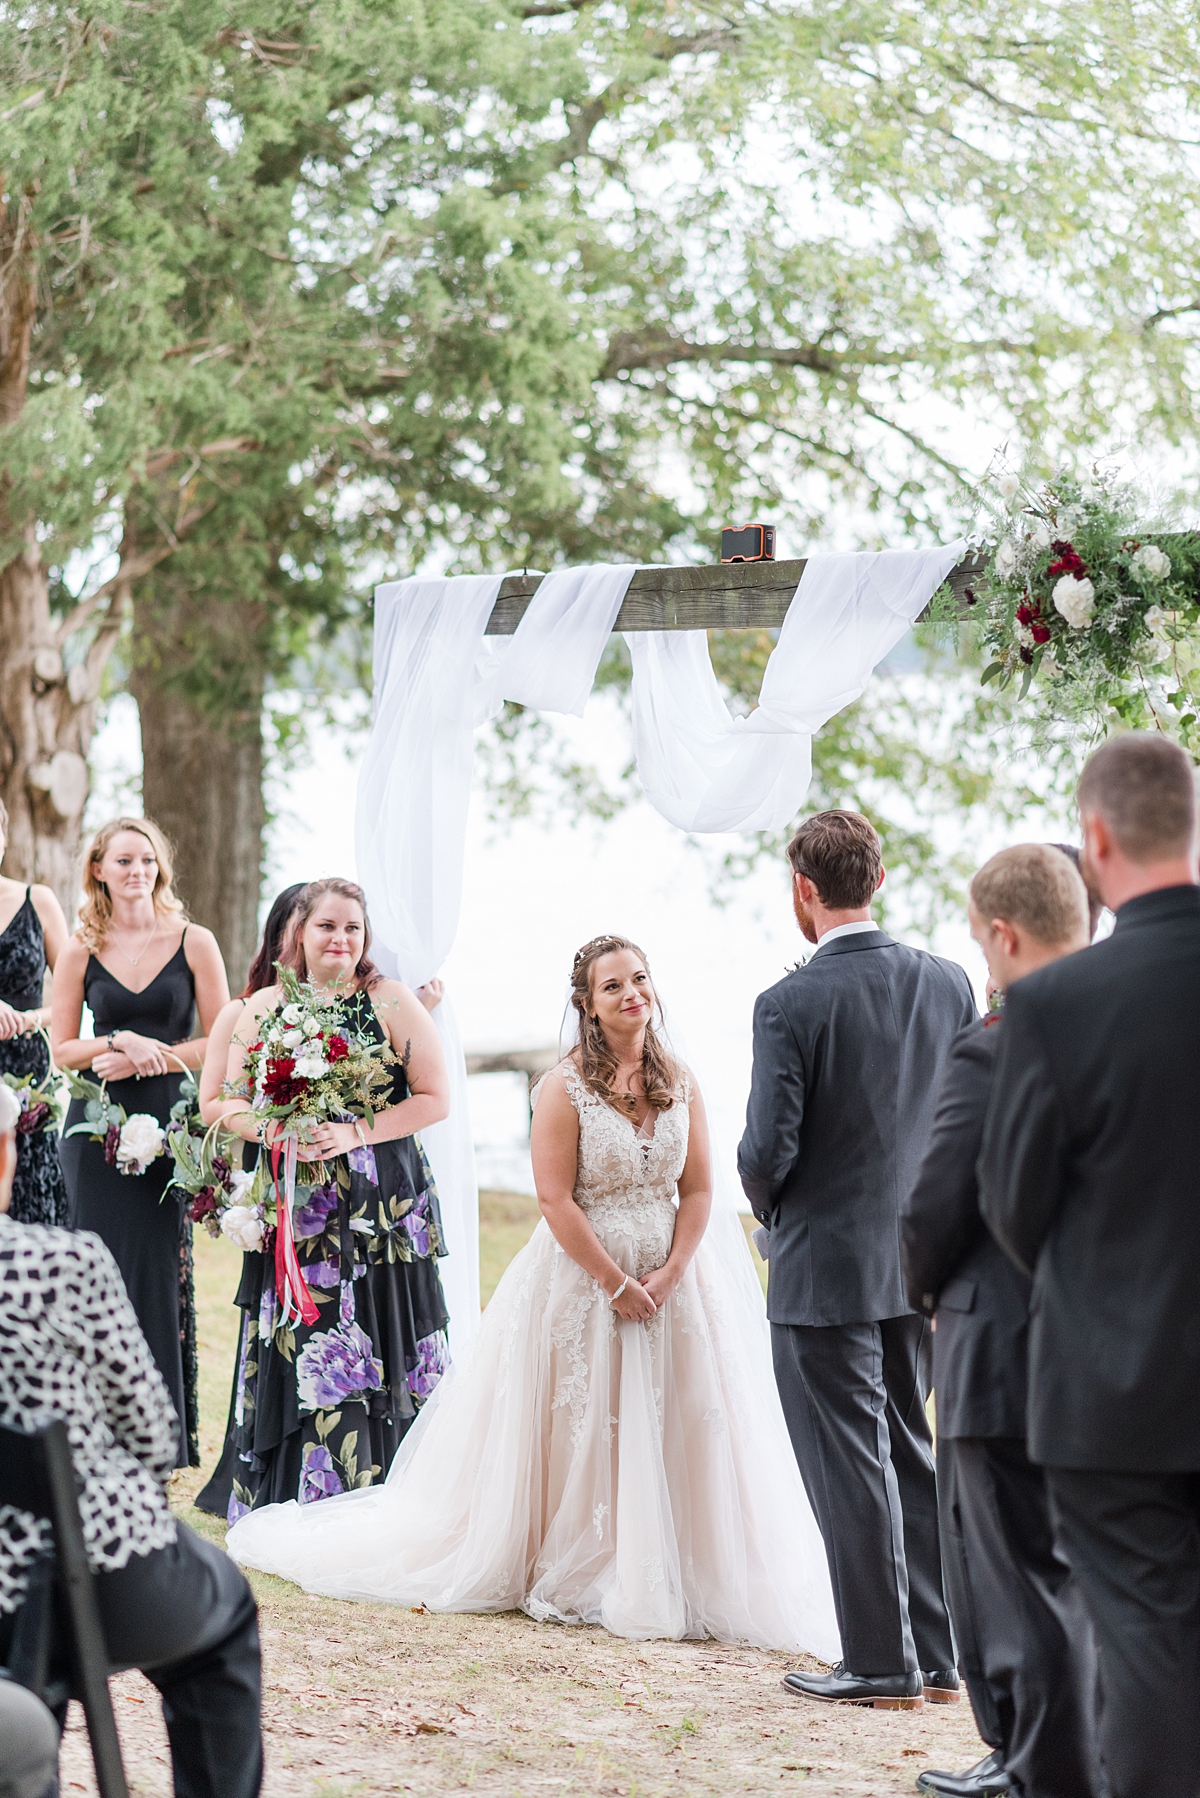 Wedding Vow Exchange During Ceremony at a Fall Lake Gaston Wedding. Wedding Photography by Richmond Wedding Photographer Kailey Brianne Photography. 